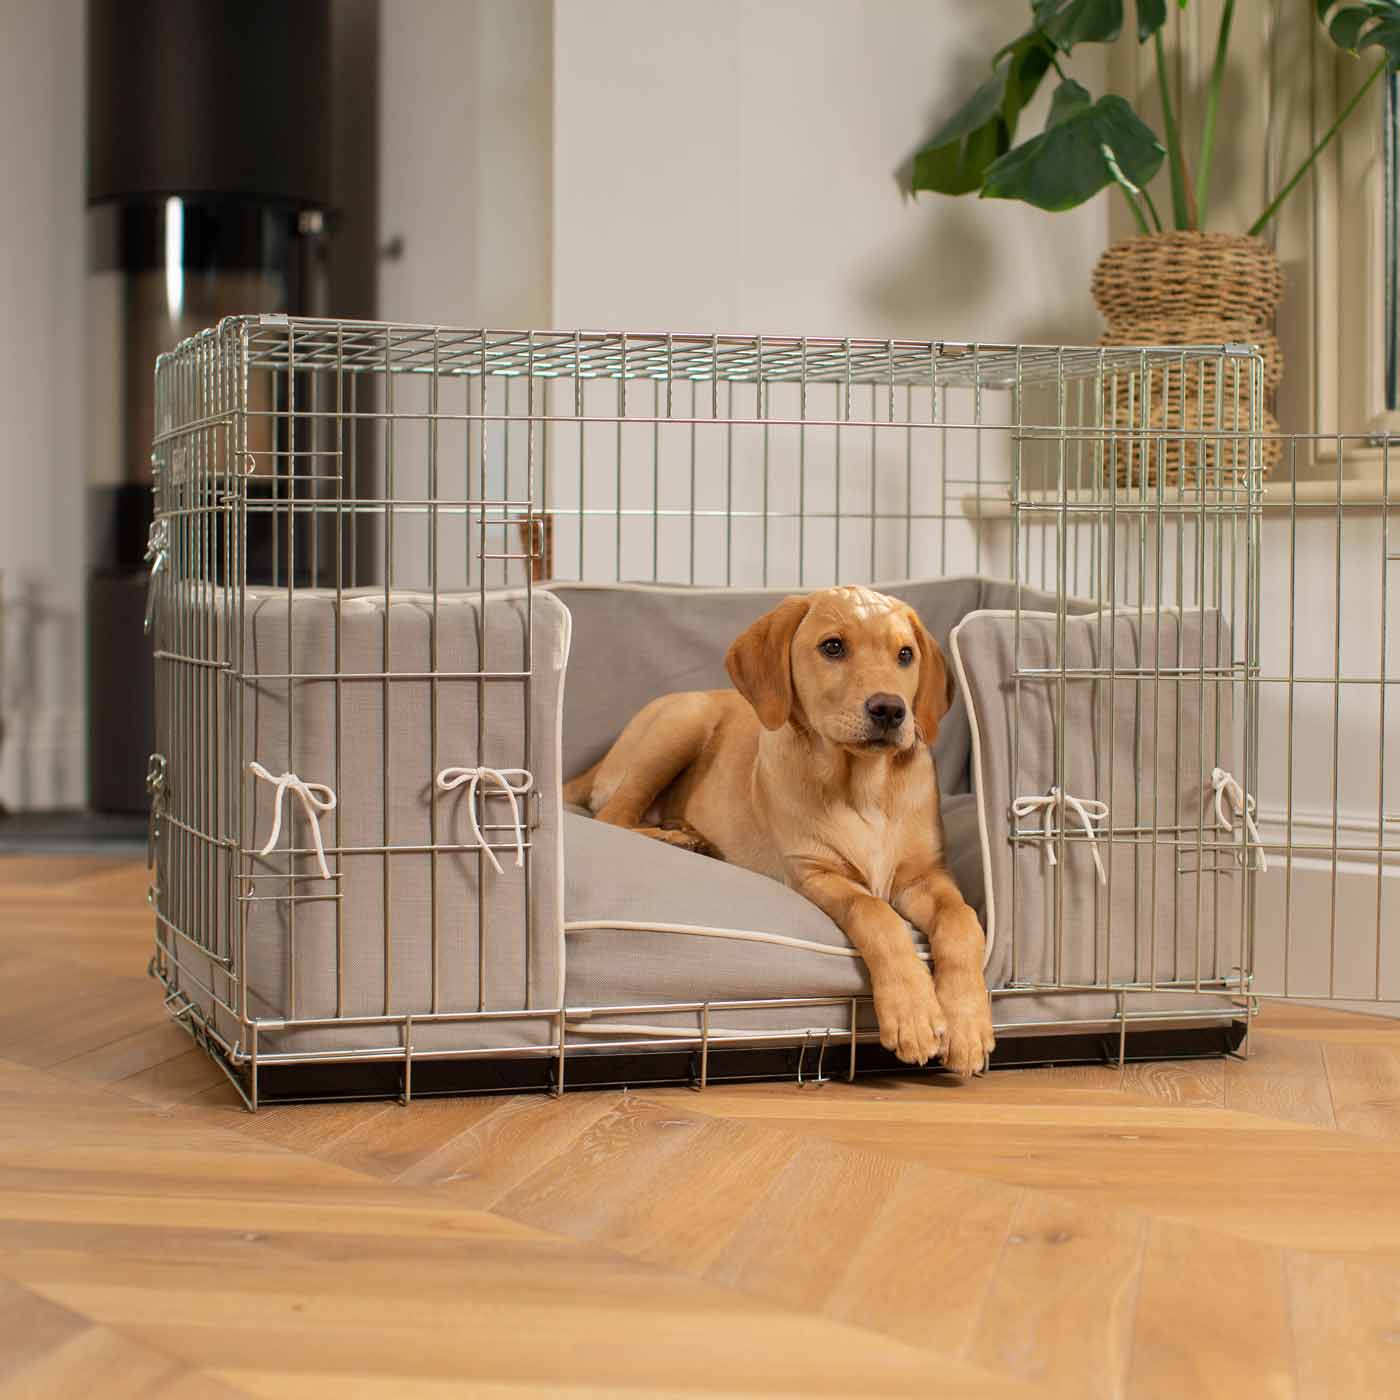 Discover our Luxury Dog Crate Bumper, in Savanna Stone. The Perfect Dog Crate Accessory, Available To Personalise Now at Lords & Labradors